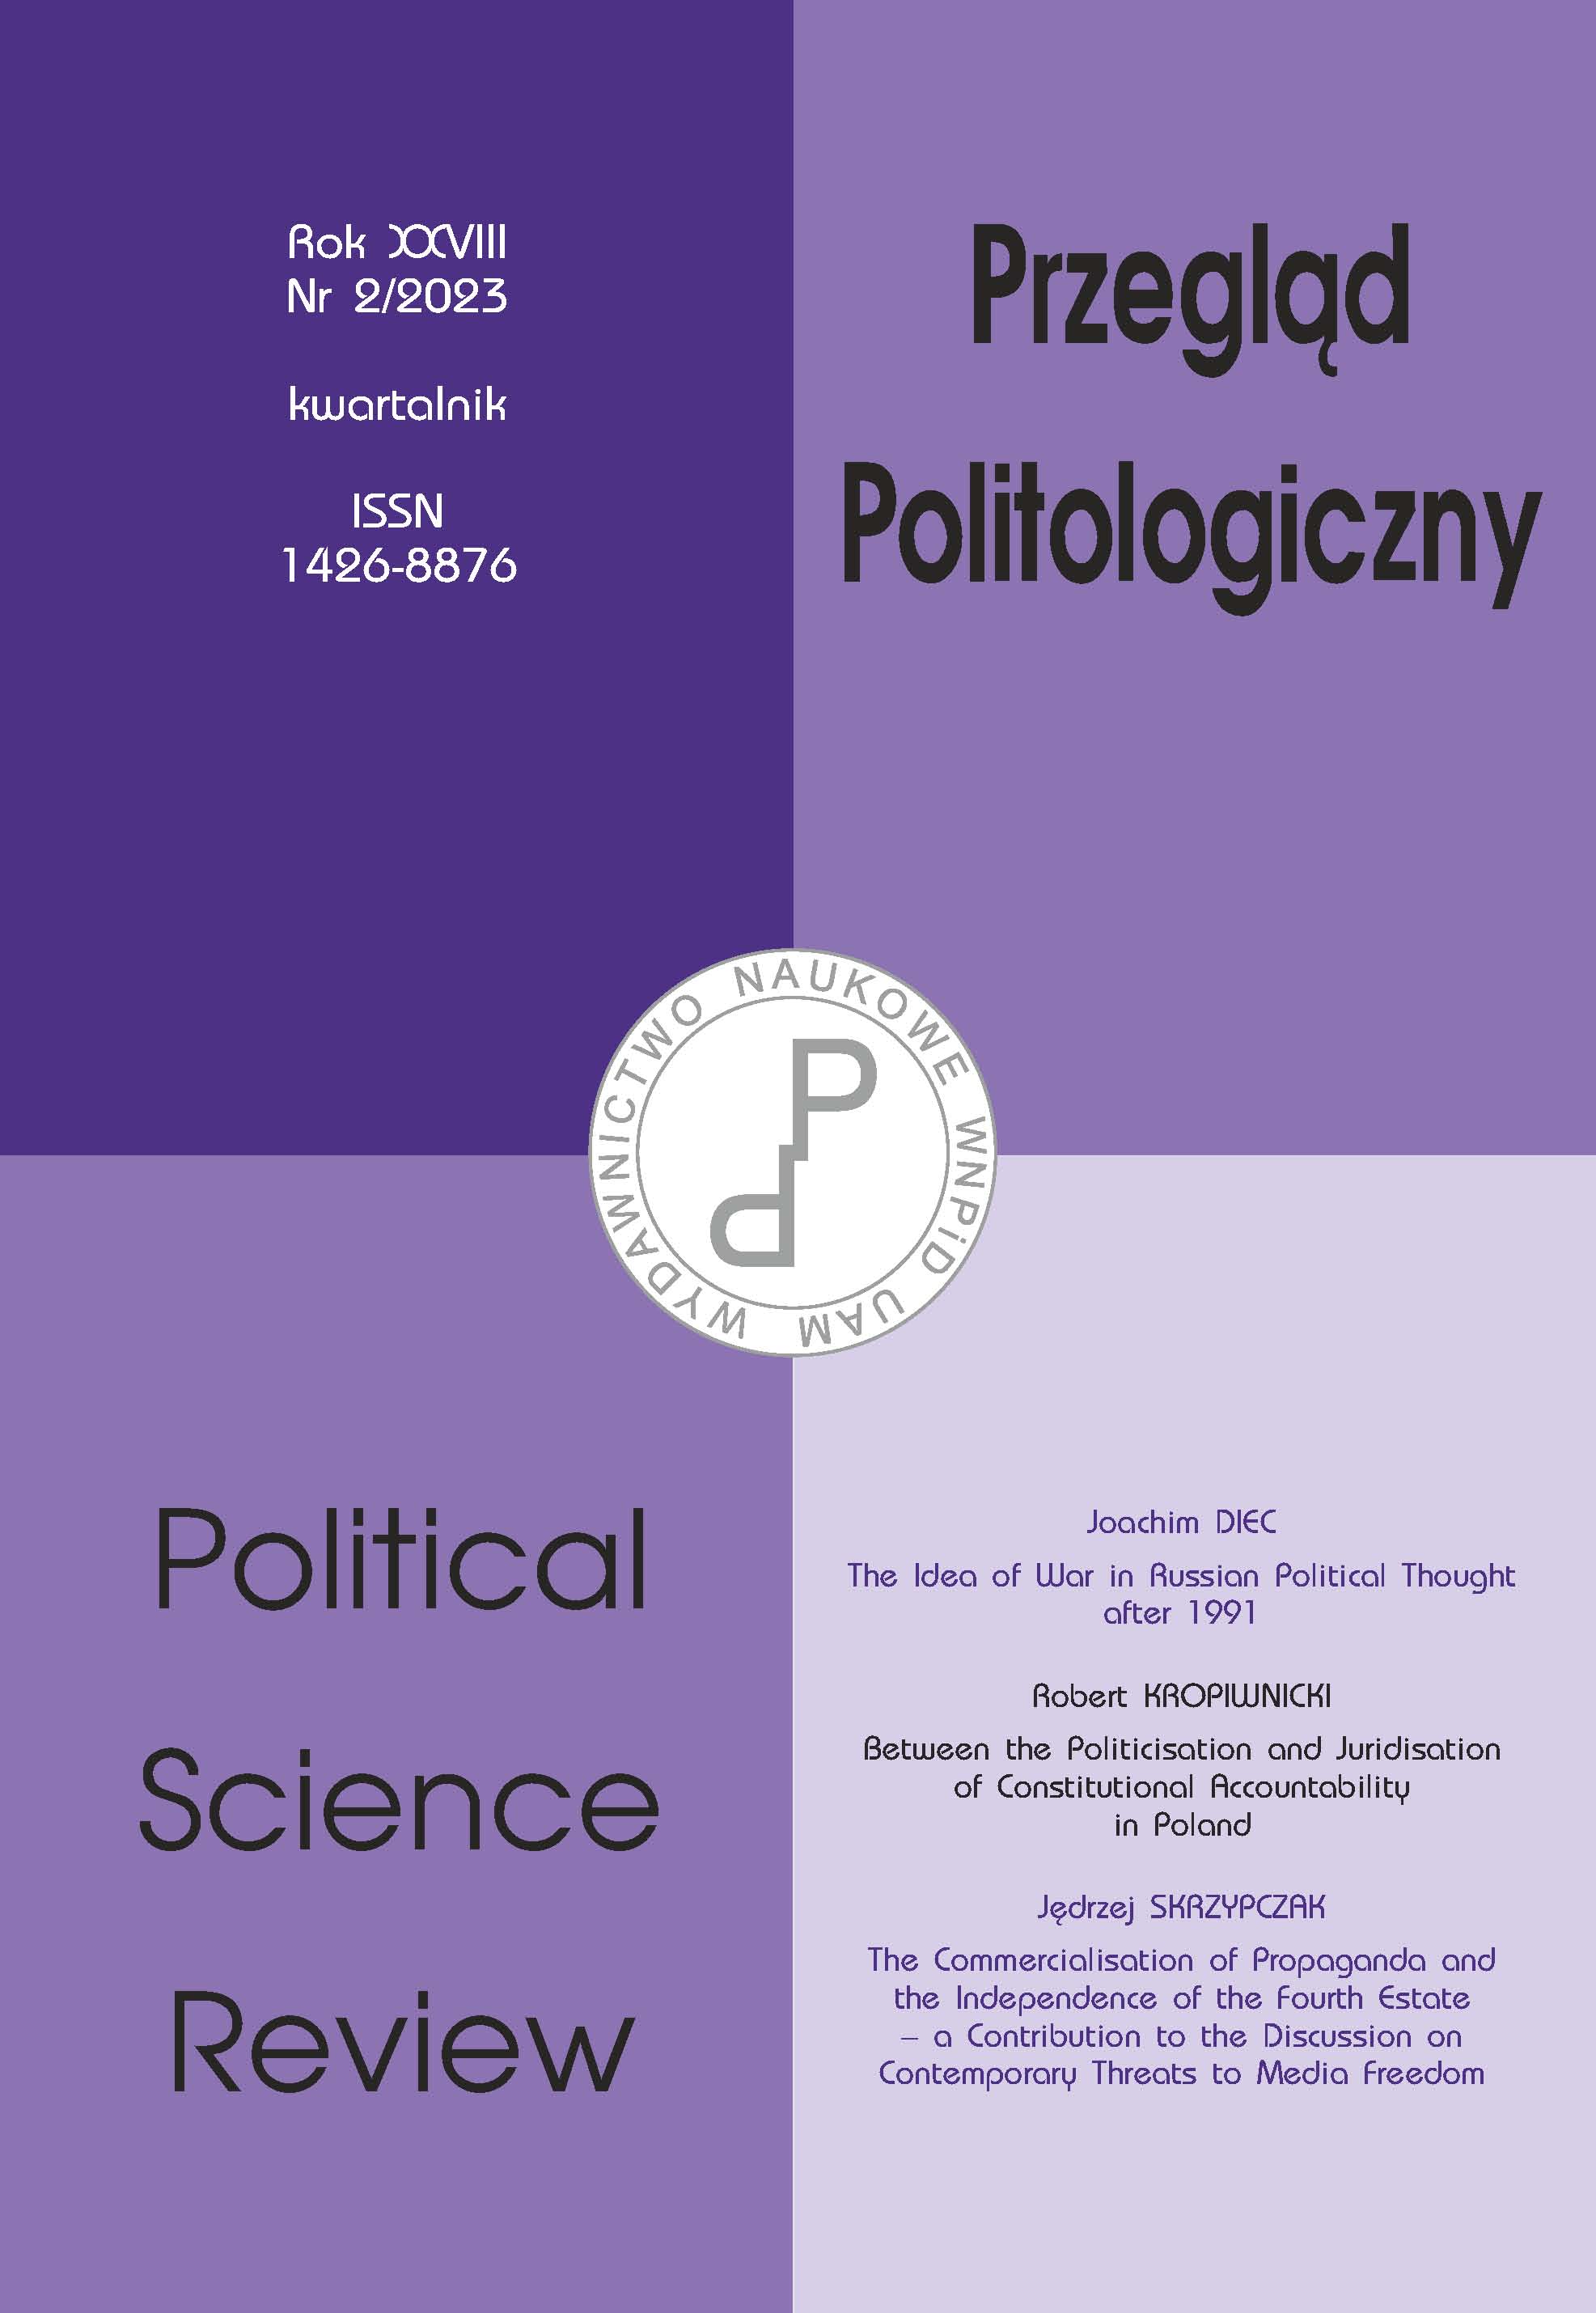 Between the Politicisation and Juridisation of Constitutional Accountability in Poland